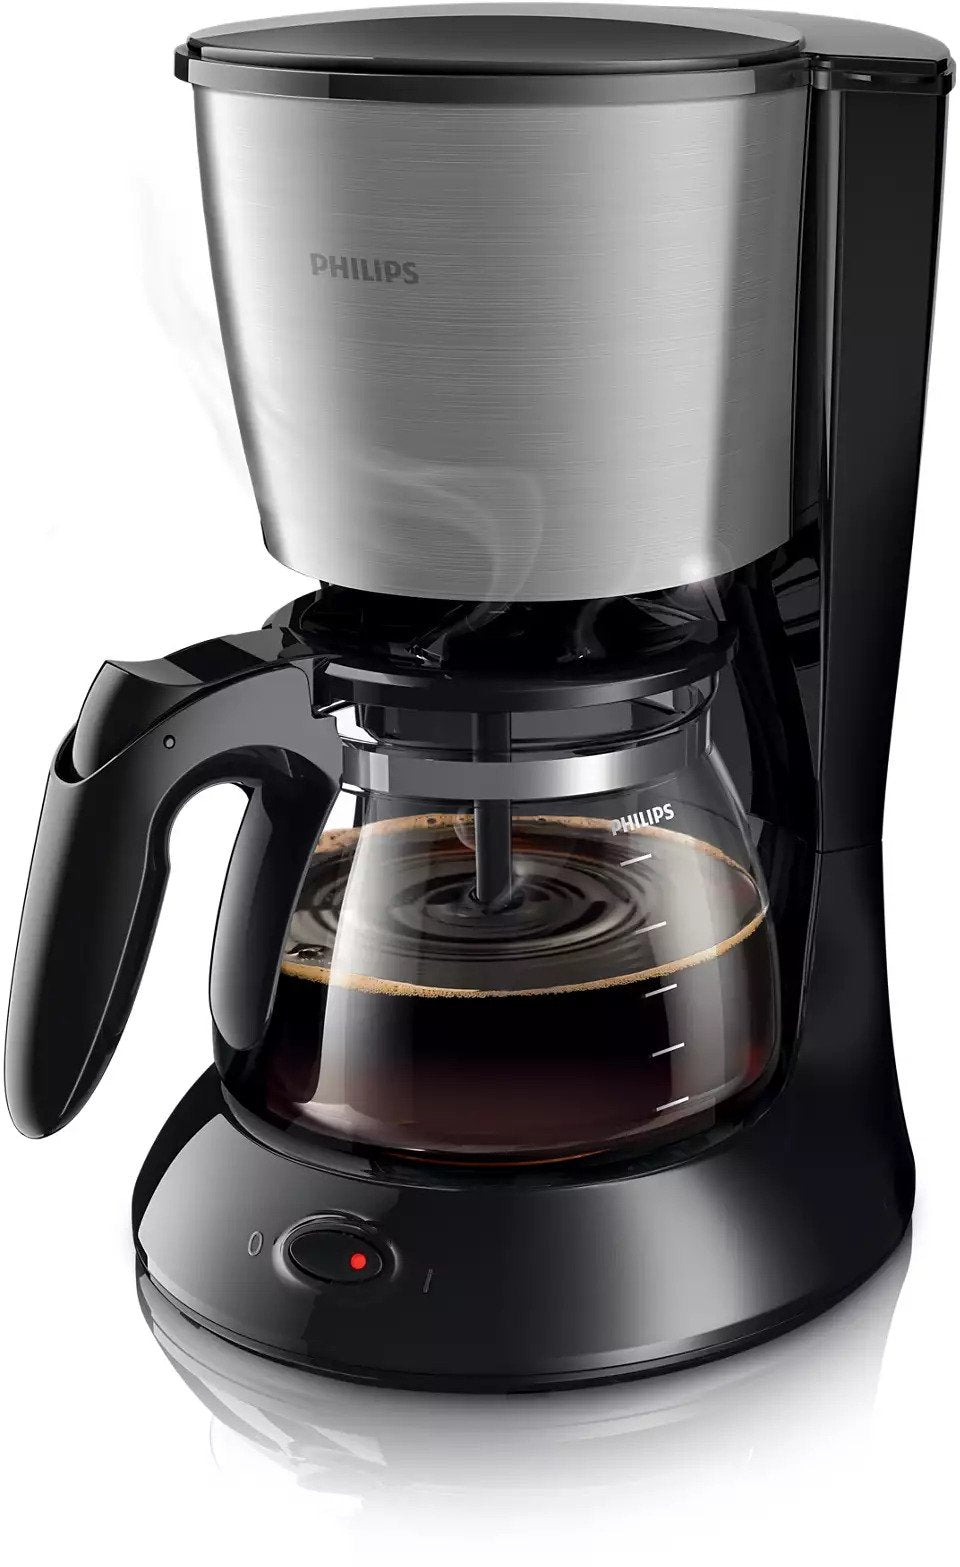 Philips Daily Collection Coffee Maker (Black)